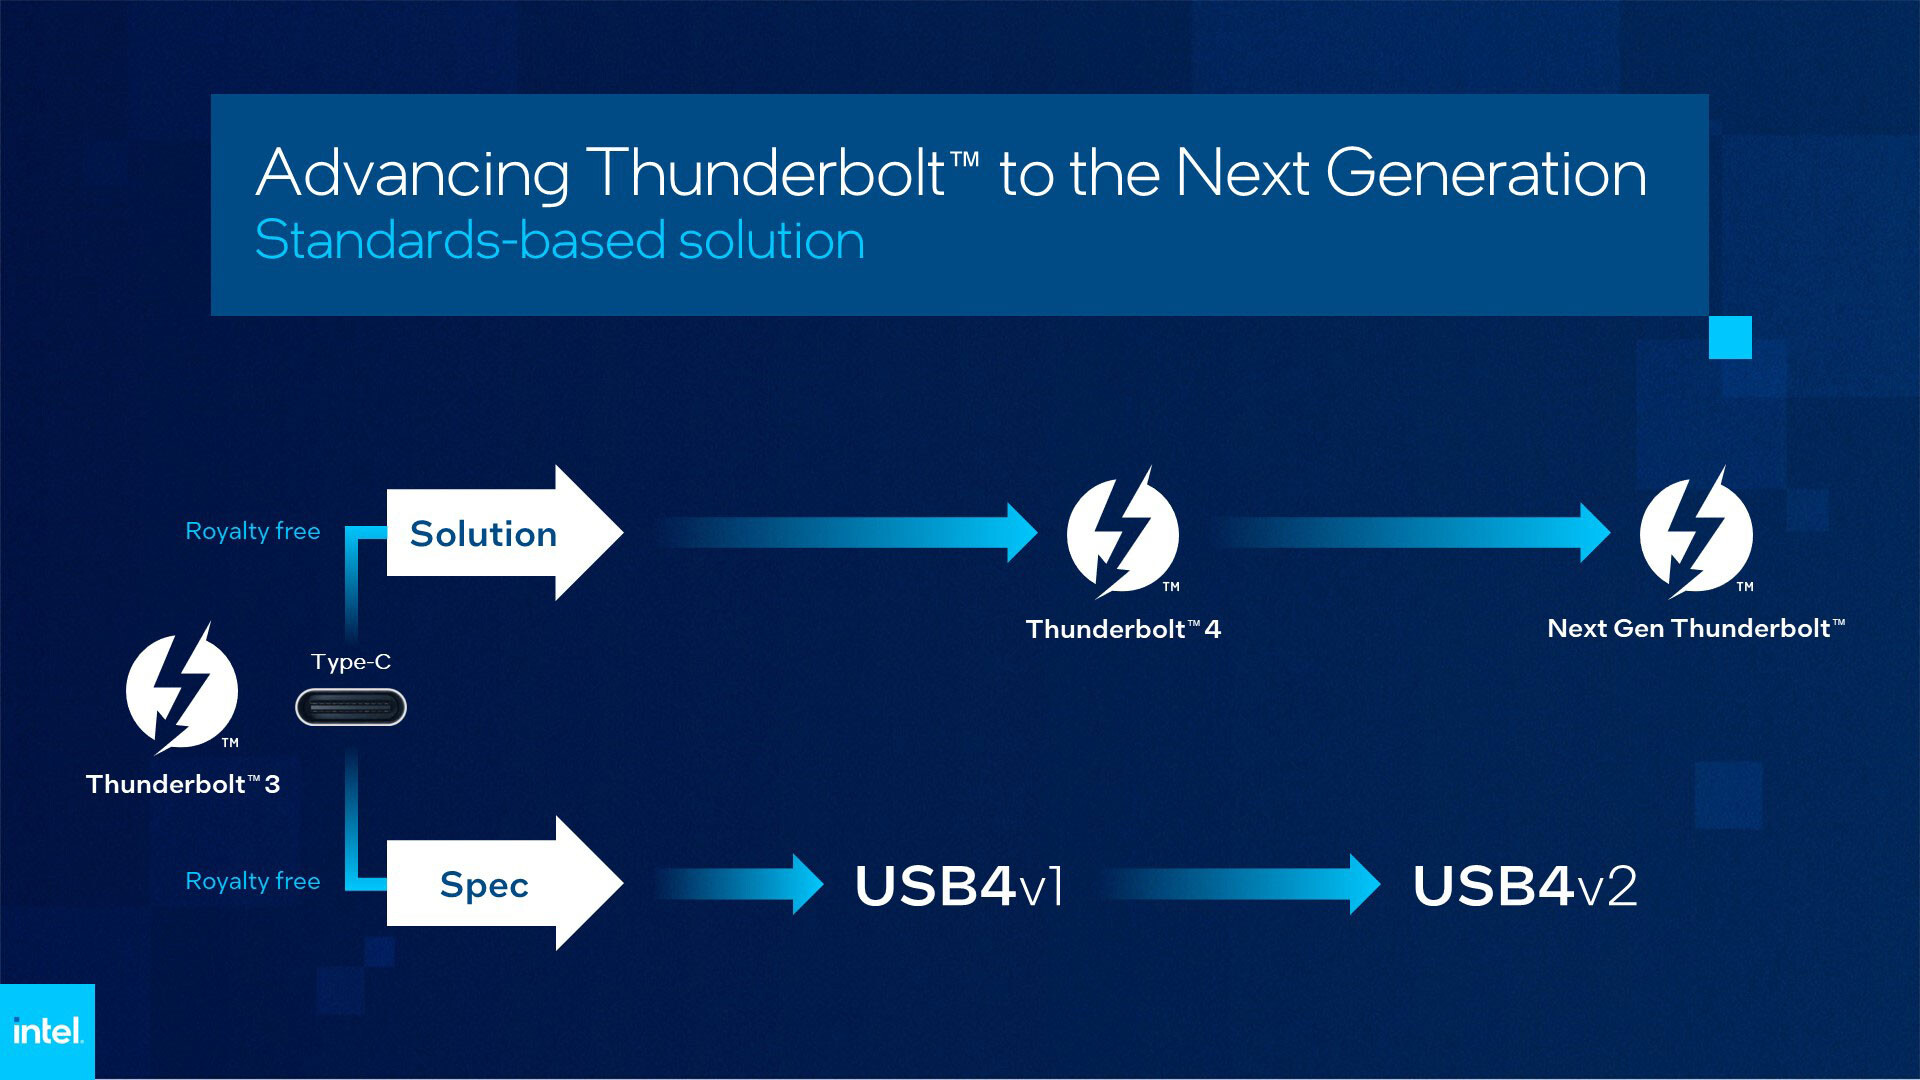 Intel introduces Thunderbolt 4 combining the best of Thunderbolt 3